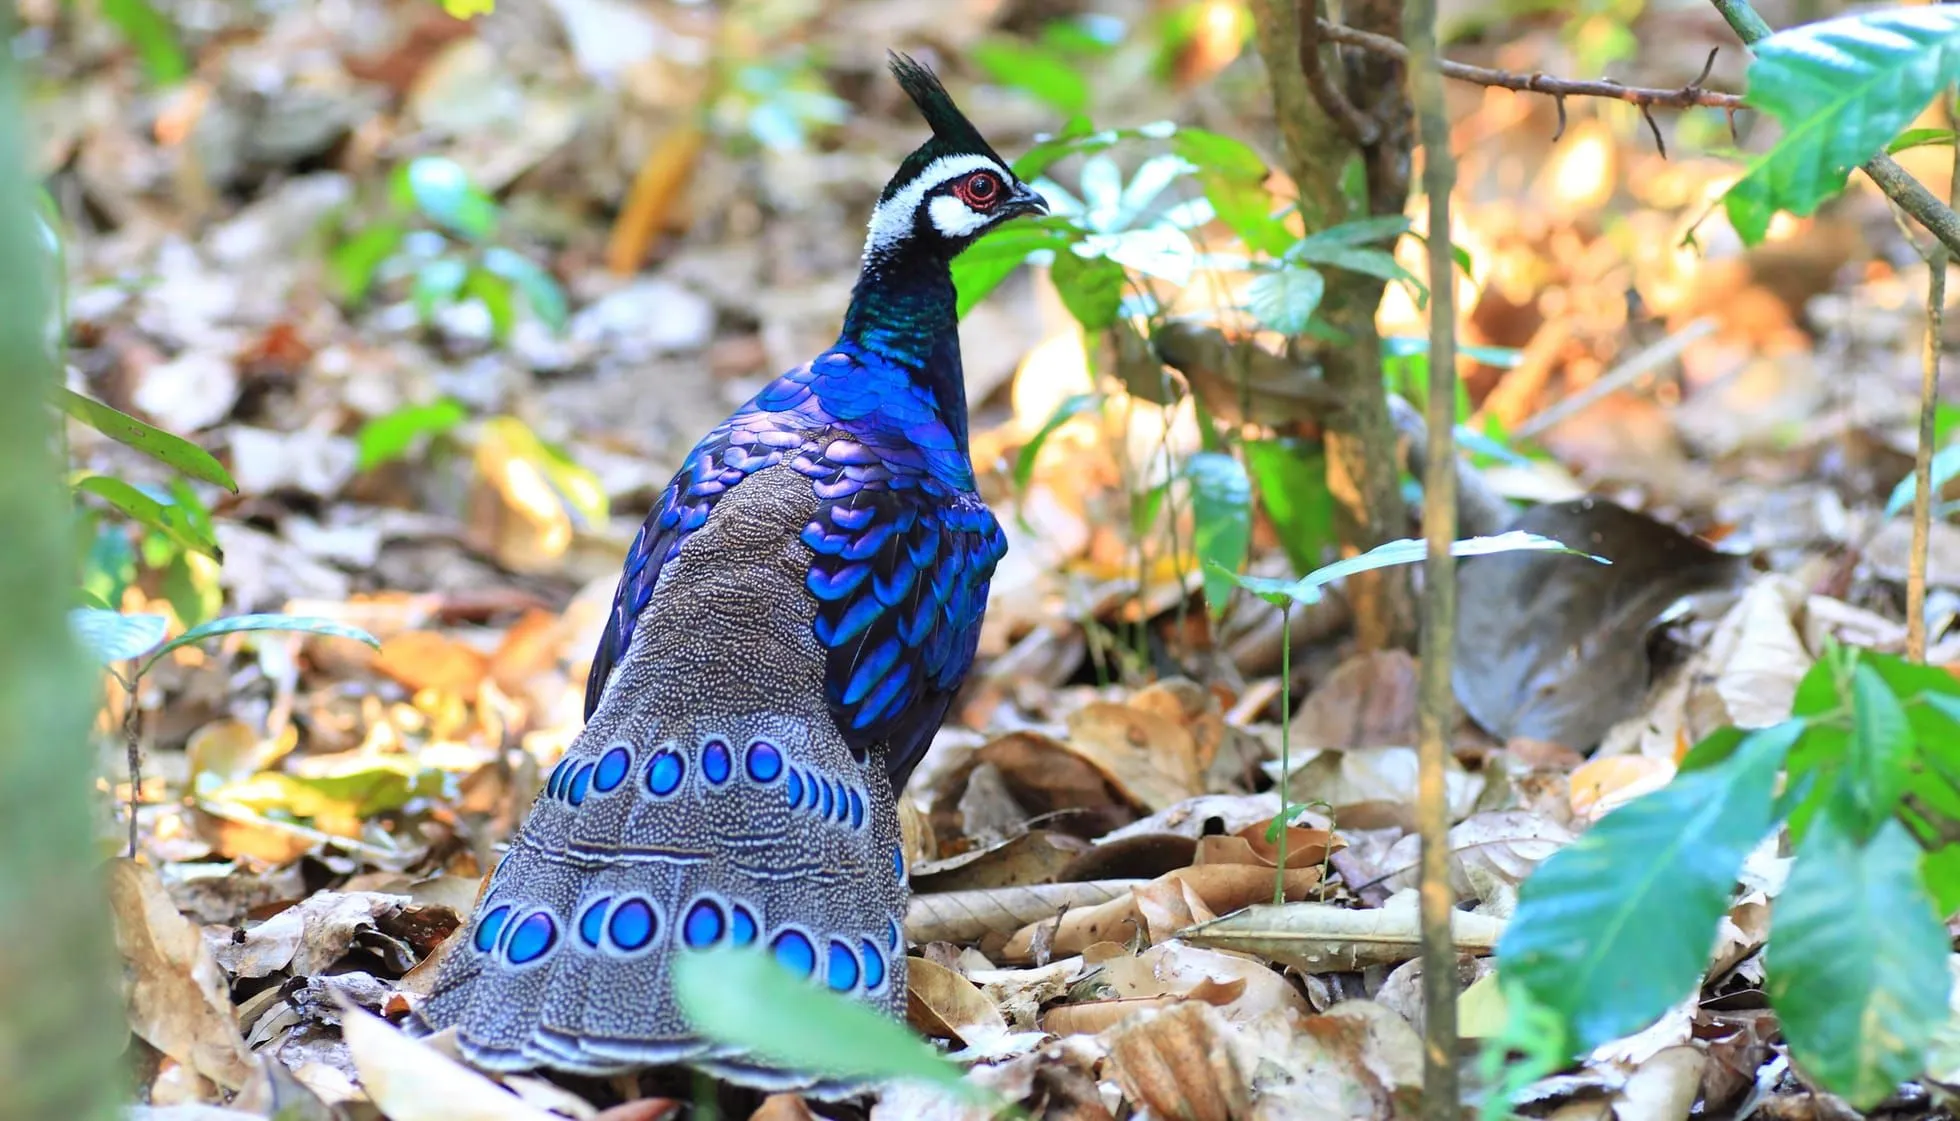  Palawan Peacock Pheasant in a forest